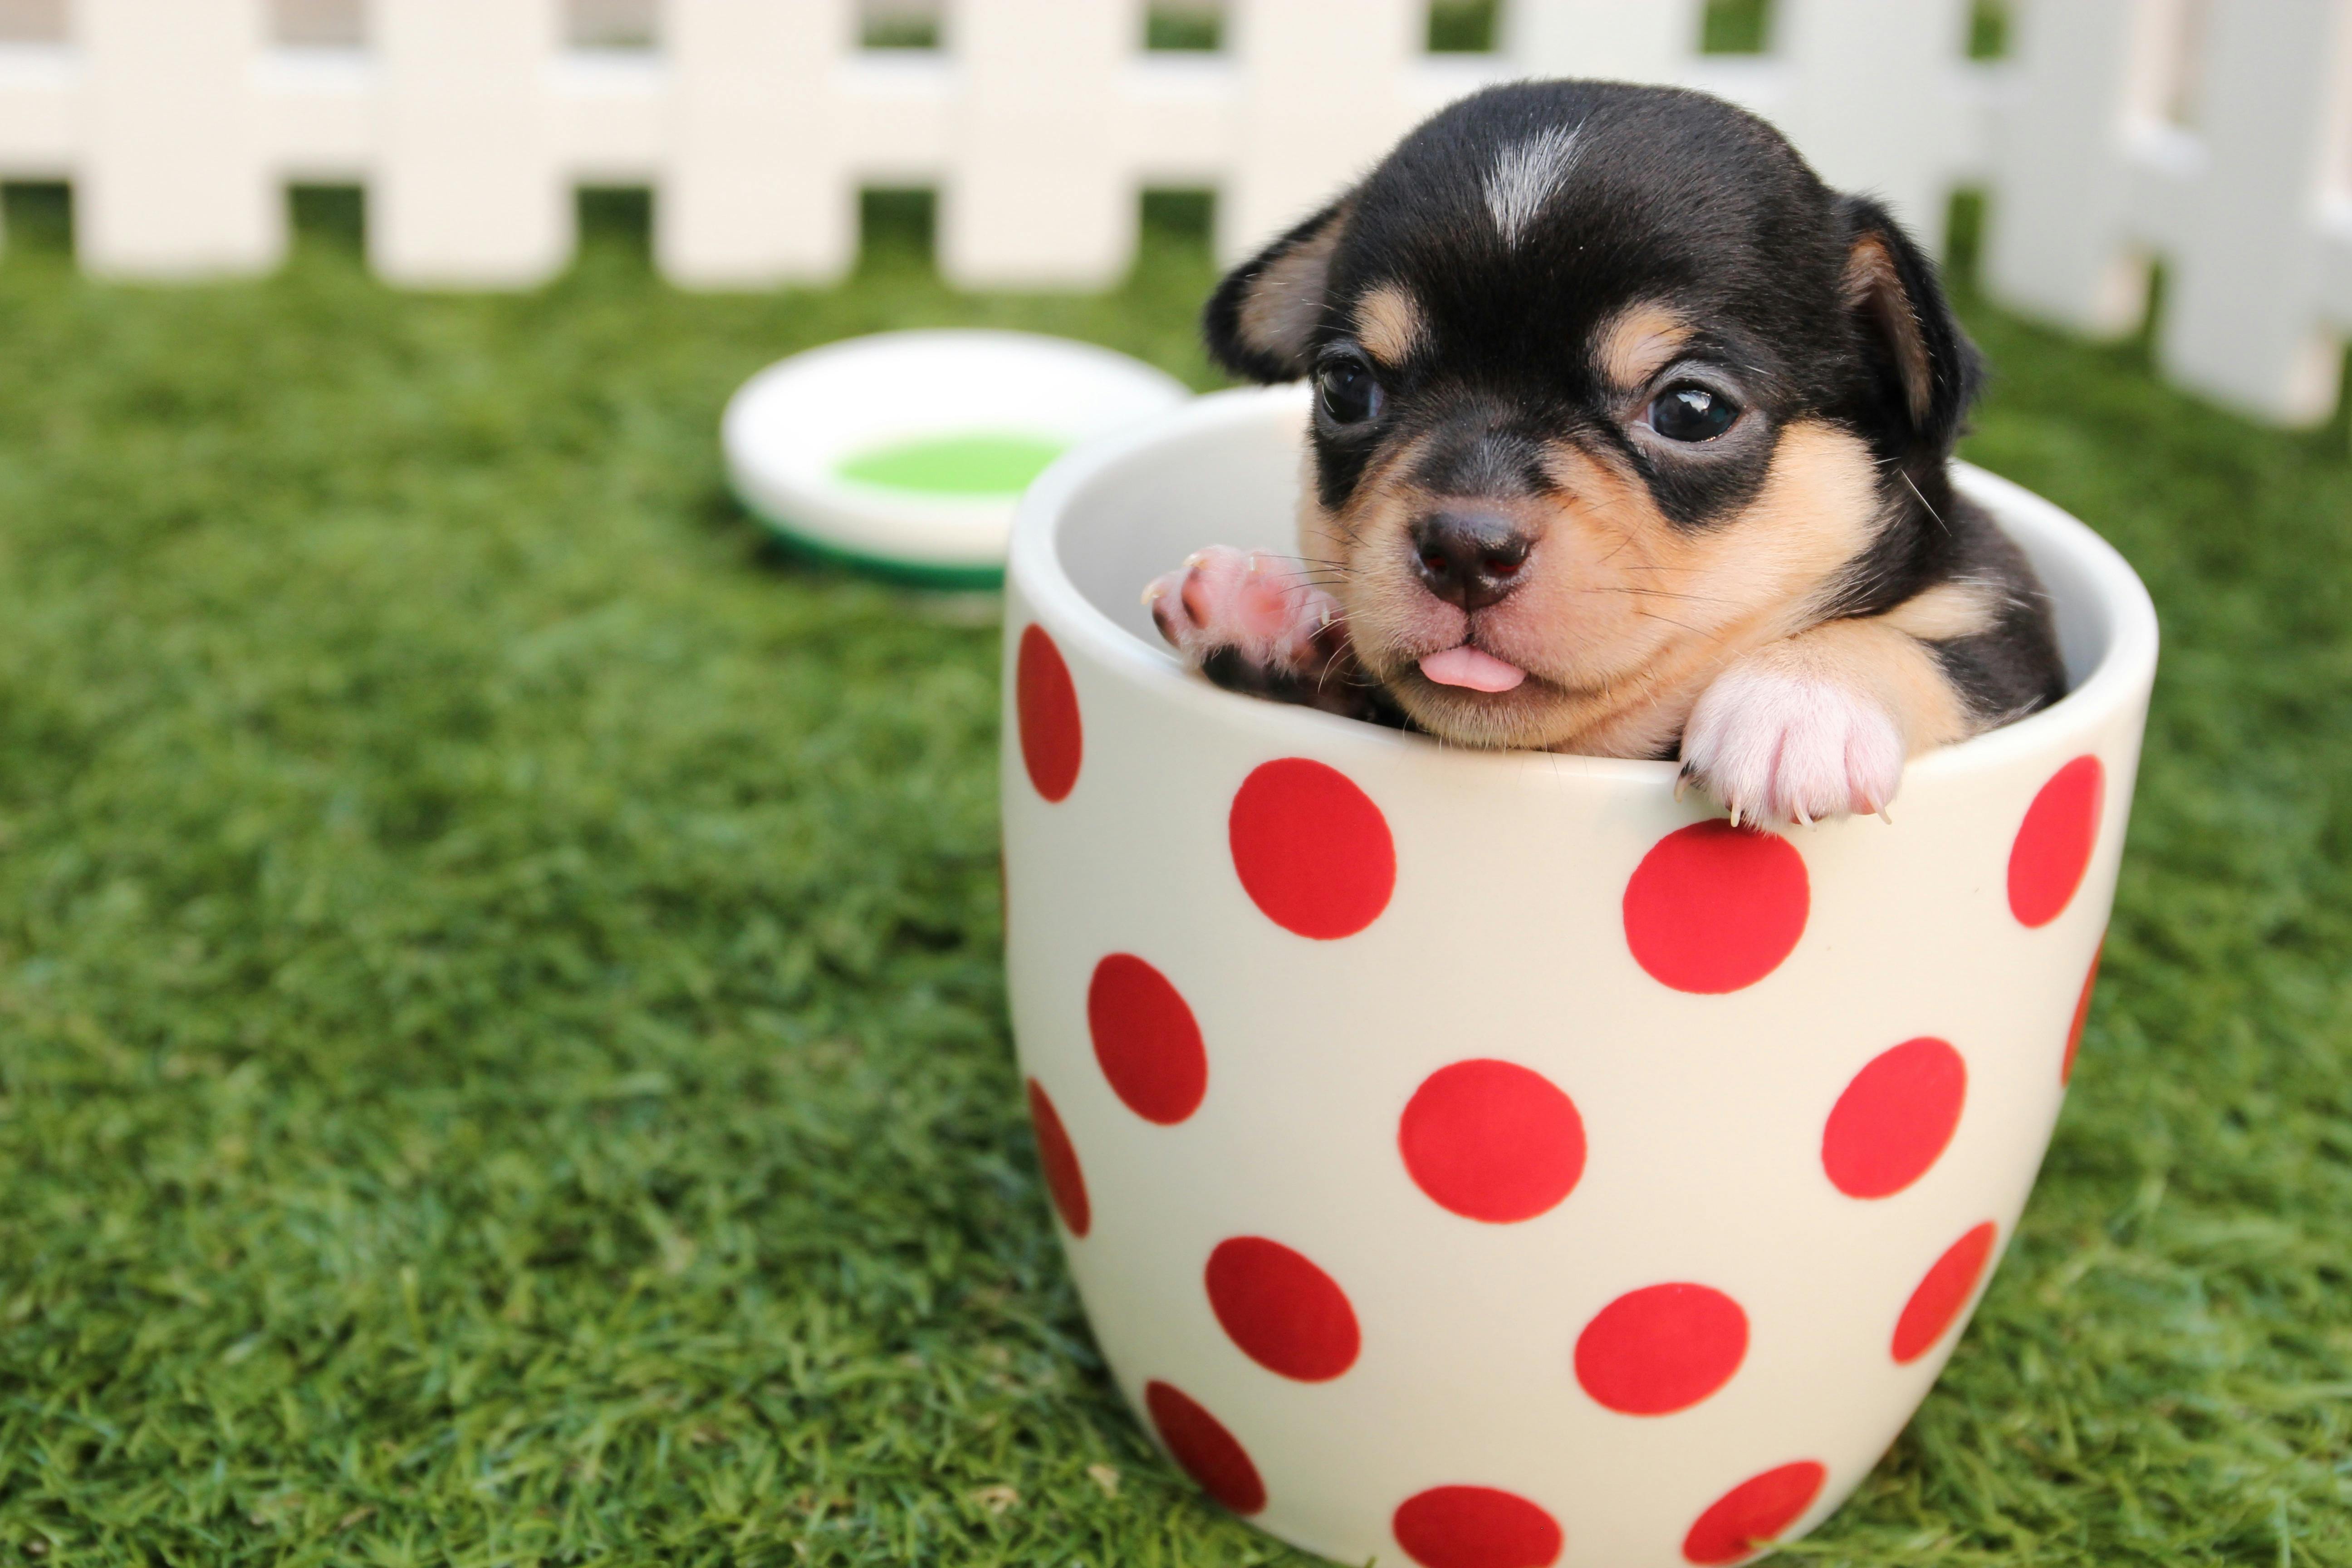 Puppy Photos, Download The BEST Free Puppy Stock Photos & HD Images